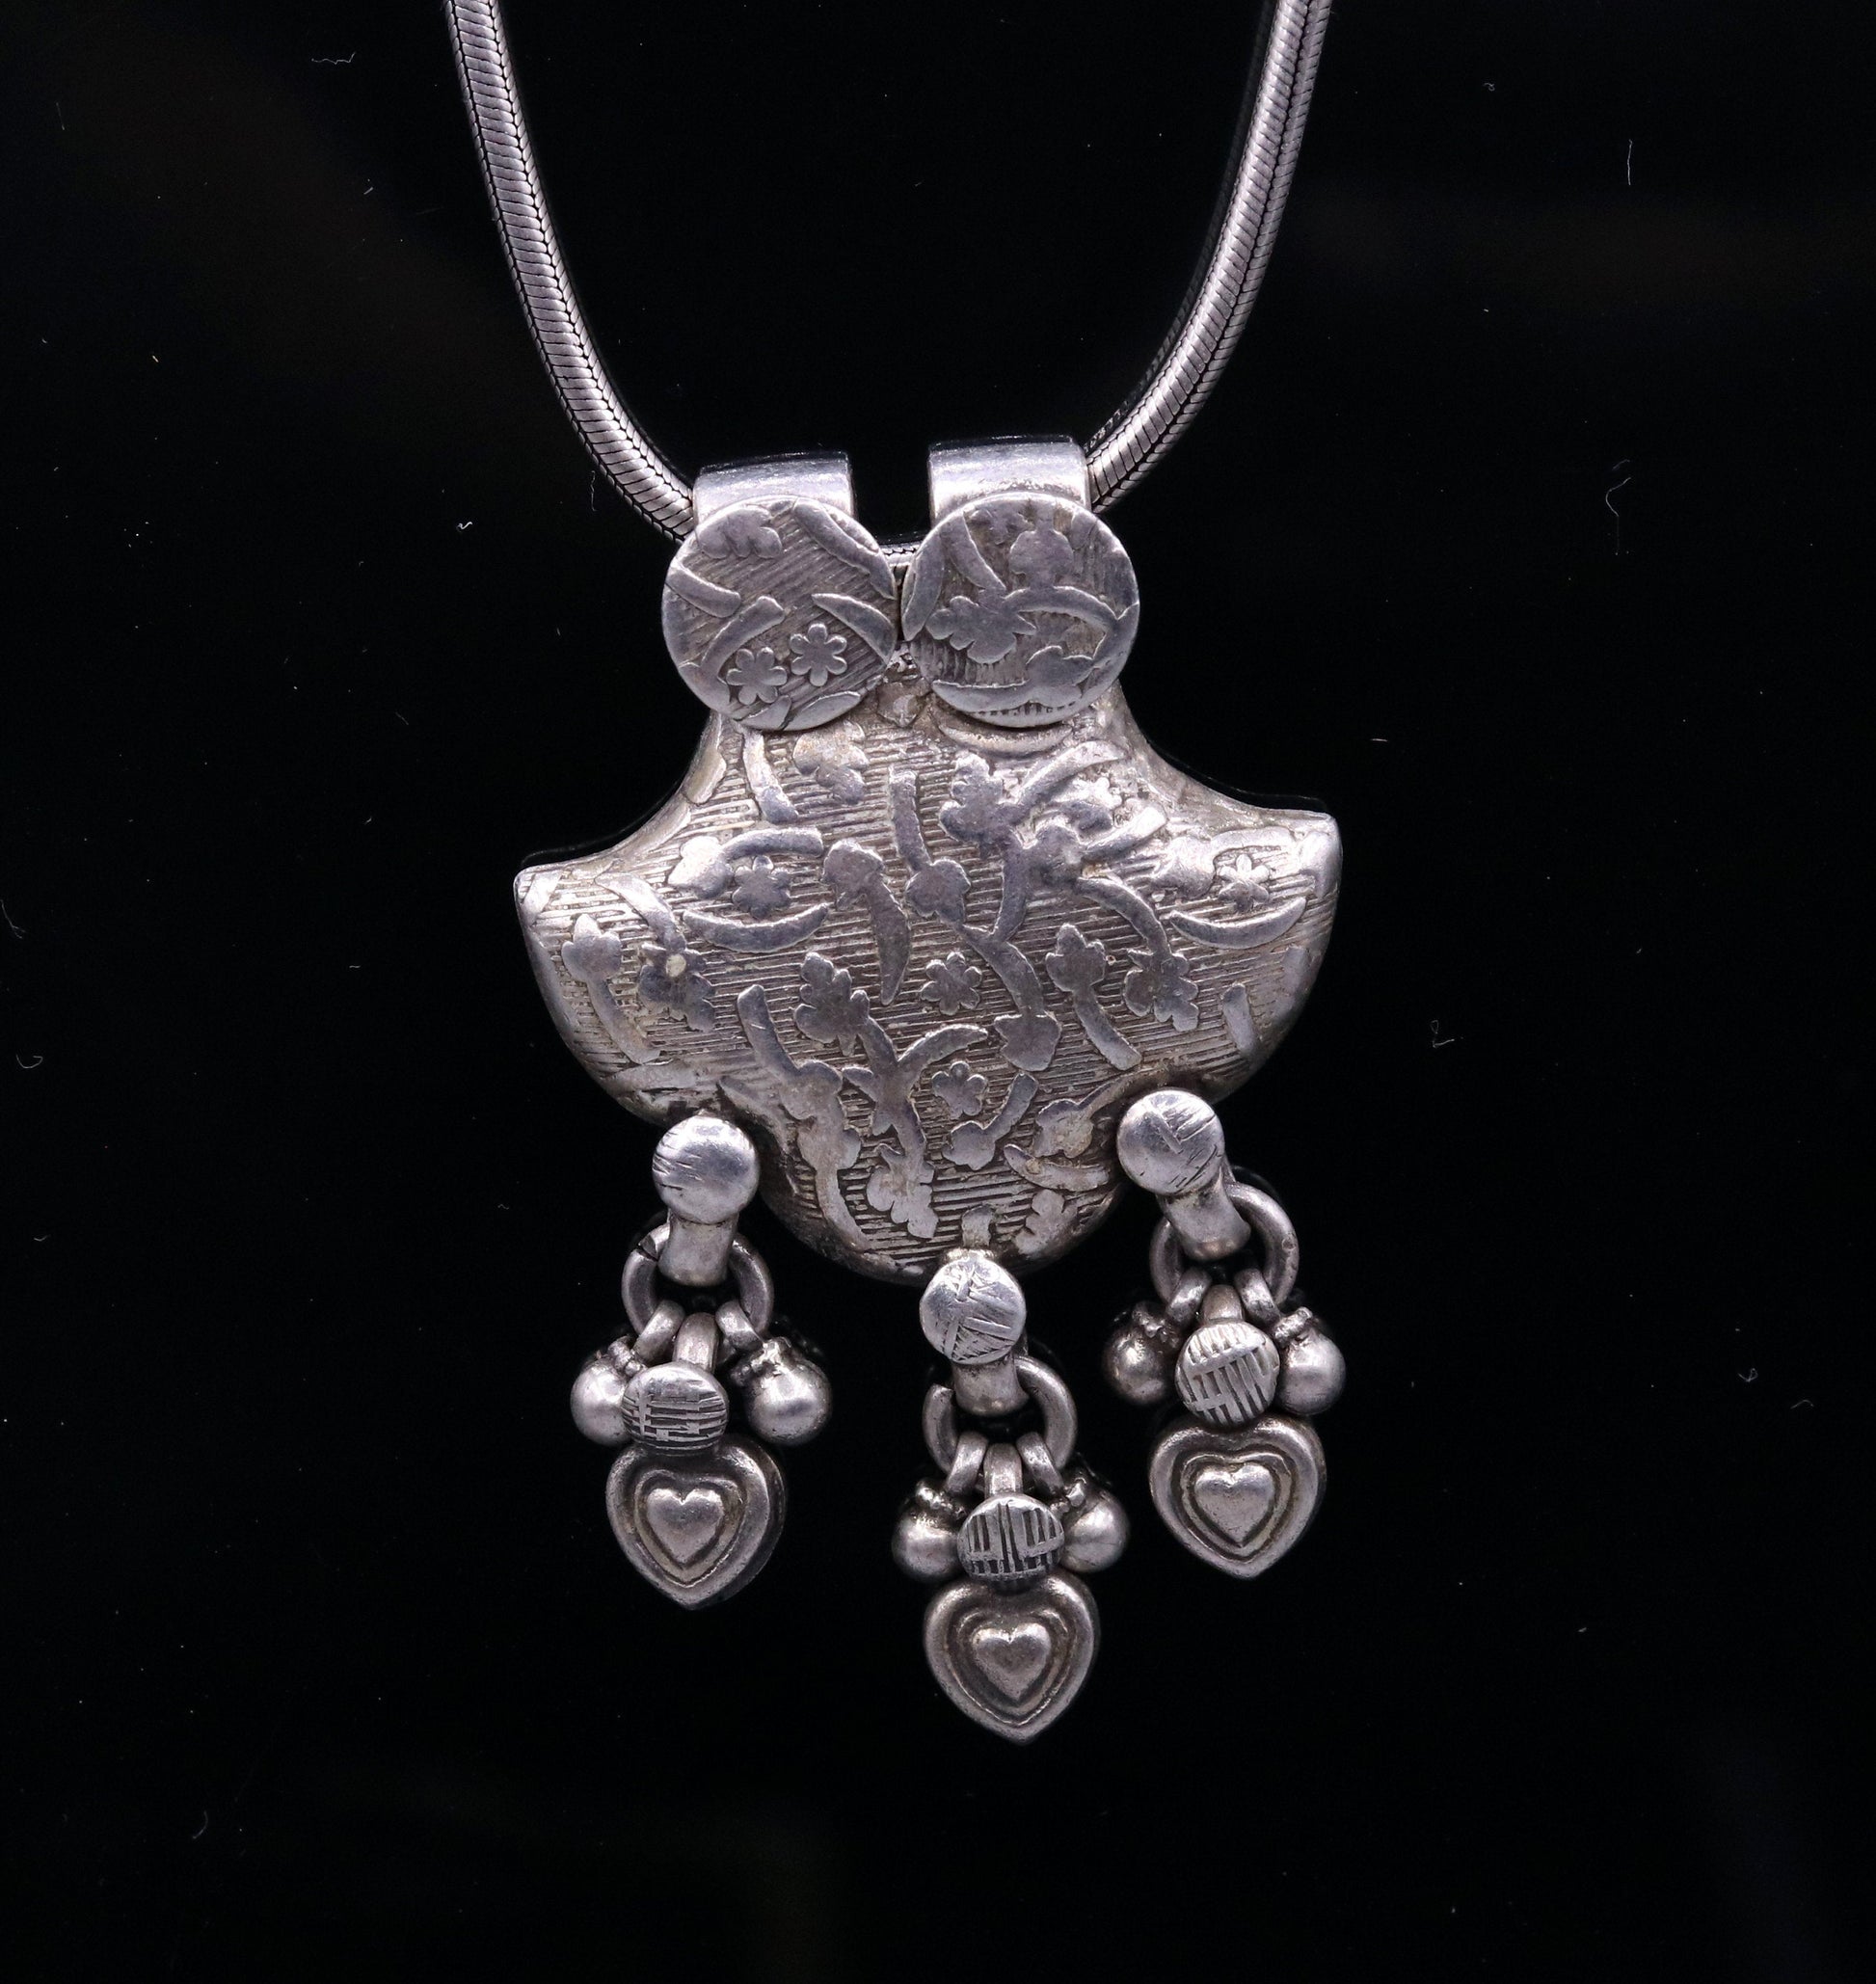 Vintage antique design handmade 925 sterling silver pendant with amazing hanging bells tribal jewelry from india nsp78 - TRIBAL ORNAMENTS